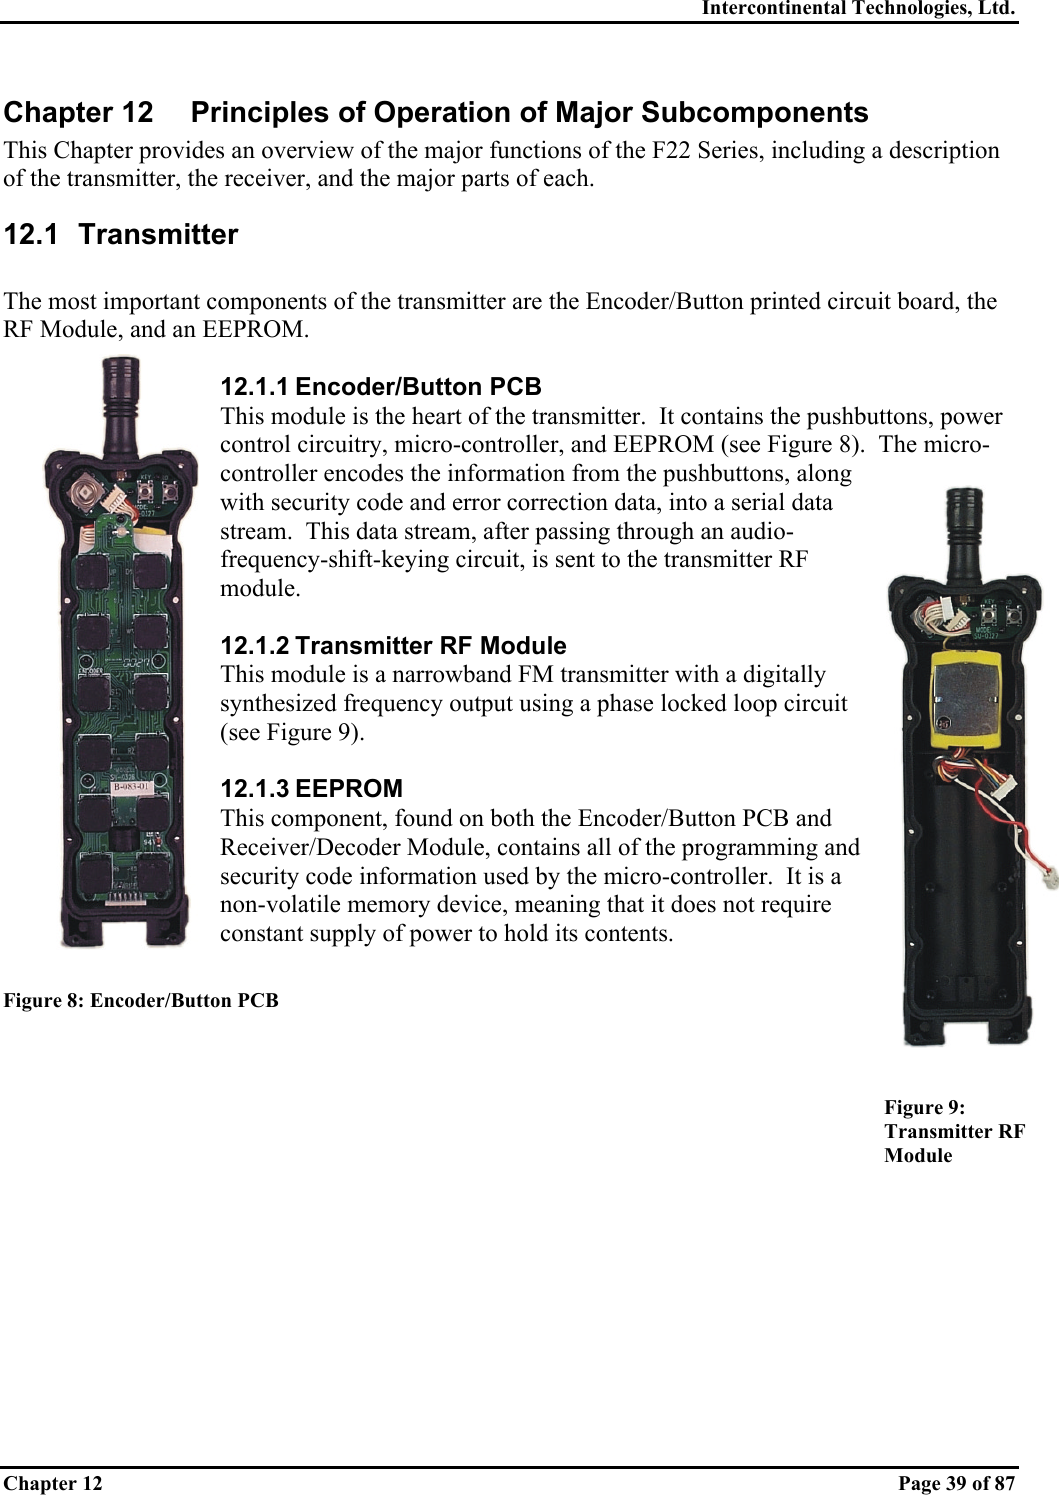 Intercontinental Technologies, Ltd. Chapter 12    Page 39 of 87 Chapter 12  Principles of Operation of Major Subcomponents This Chapter provides an overview of the major functions of the F22 Series, including a description of the transmitter, the receiver, and the major parts of each. 12.1 Transmitter  The most important components of the transmitter are the Encoder/Button printed circuit board, the RF Module, and an EEPROM.  12.1.1 Encoder/Button PCB This module is the heart of the transmitter.  It contains the pushbuttons, power control circuitry, micro-controller, and EEPROM (see Figure 8).  The micro-controller encodes the information from the pushbuttons, along with security code and error correction data, into a serial data stream.  This data stream, after passing through an audio-frequency-shift-keying circuit, is sent to the transmitter RF module.  12.1.2 Transmitter RF Module This module is a narrowband FM transmitter with a digitally synthesized frequency output using a phase locked loop circuit (see Figure 9).  12.1.3 EEPROM This component, found on both the Encoder/Button PCB and Receiver/Decoder Module, contains all of the programming and security code information used by the micro-controller.  It is a non-volatile memory device, meaning that it does not require constant supply of power to hold its contents.  Figure 8: Encoder/Button PCB   Figure 9:  Transmitter RF Module 